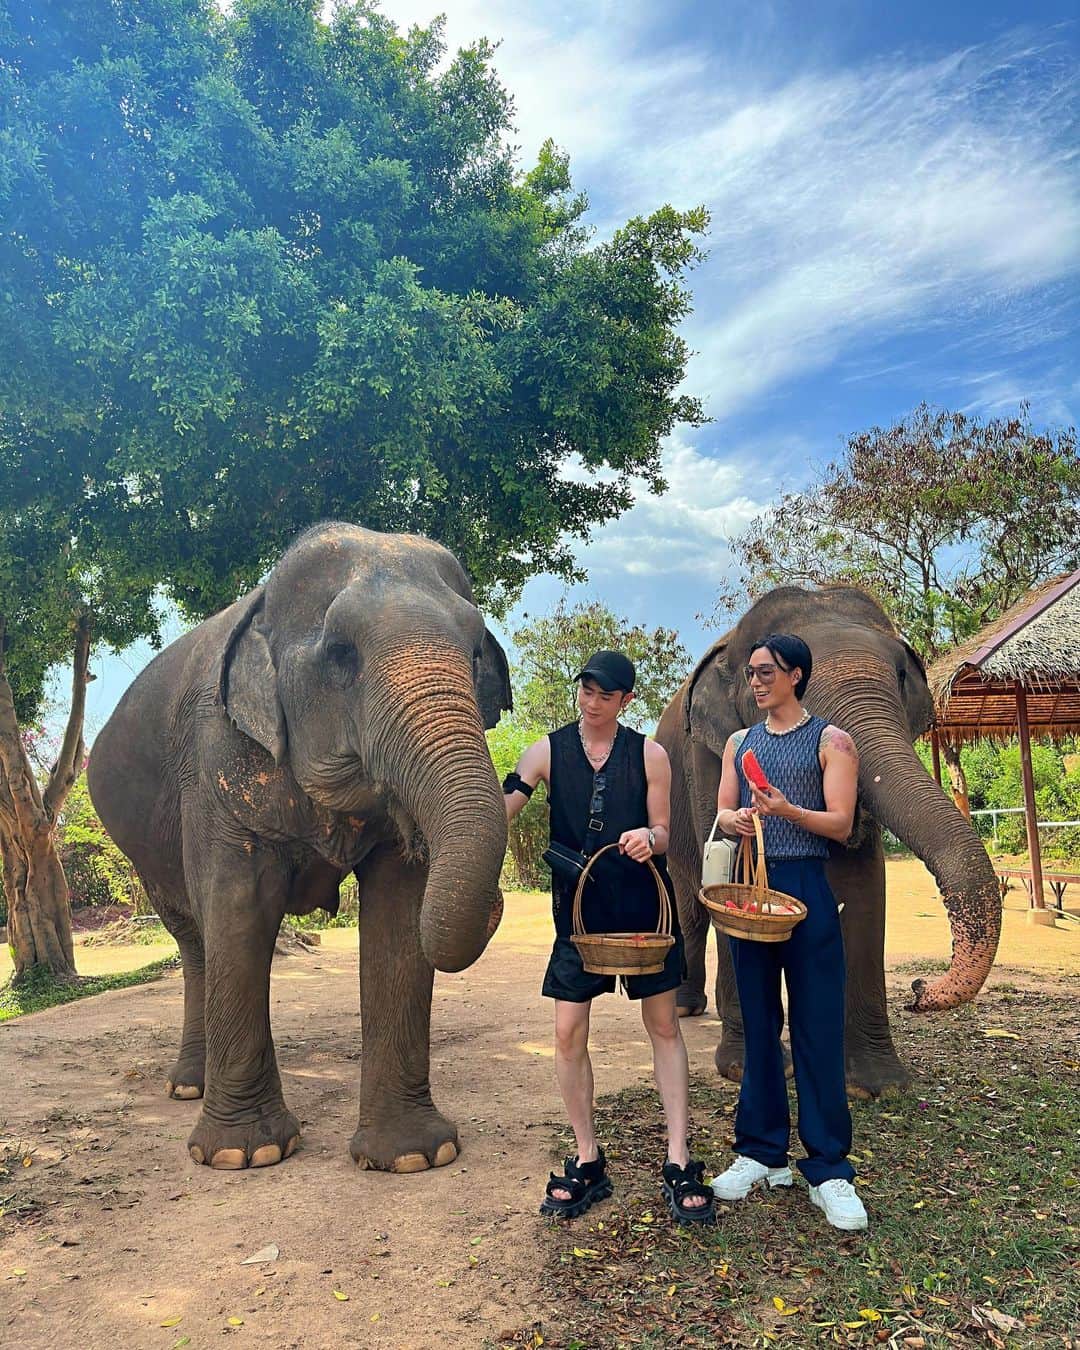 Noah（ノア）のインスタグラム：「Last day in Koh Samui 🇹🇭  Never have I ever imagined I'd be on this paradise of an island called Koh Samui.  The memory We made, people We met, and the island will be forever cherished. Bye for now but We'll be back.  ขอบคุณครับ ไว้เจอกันใหม่นะครับ 🙏🏻  #TaikiNoah#Thailand#KohSamui」